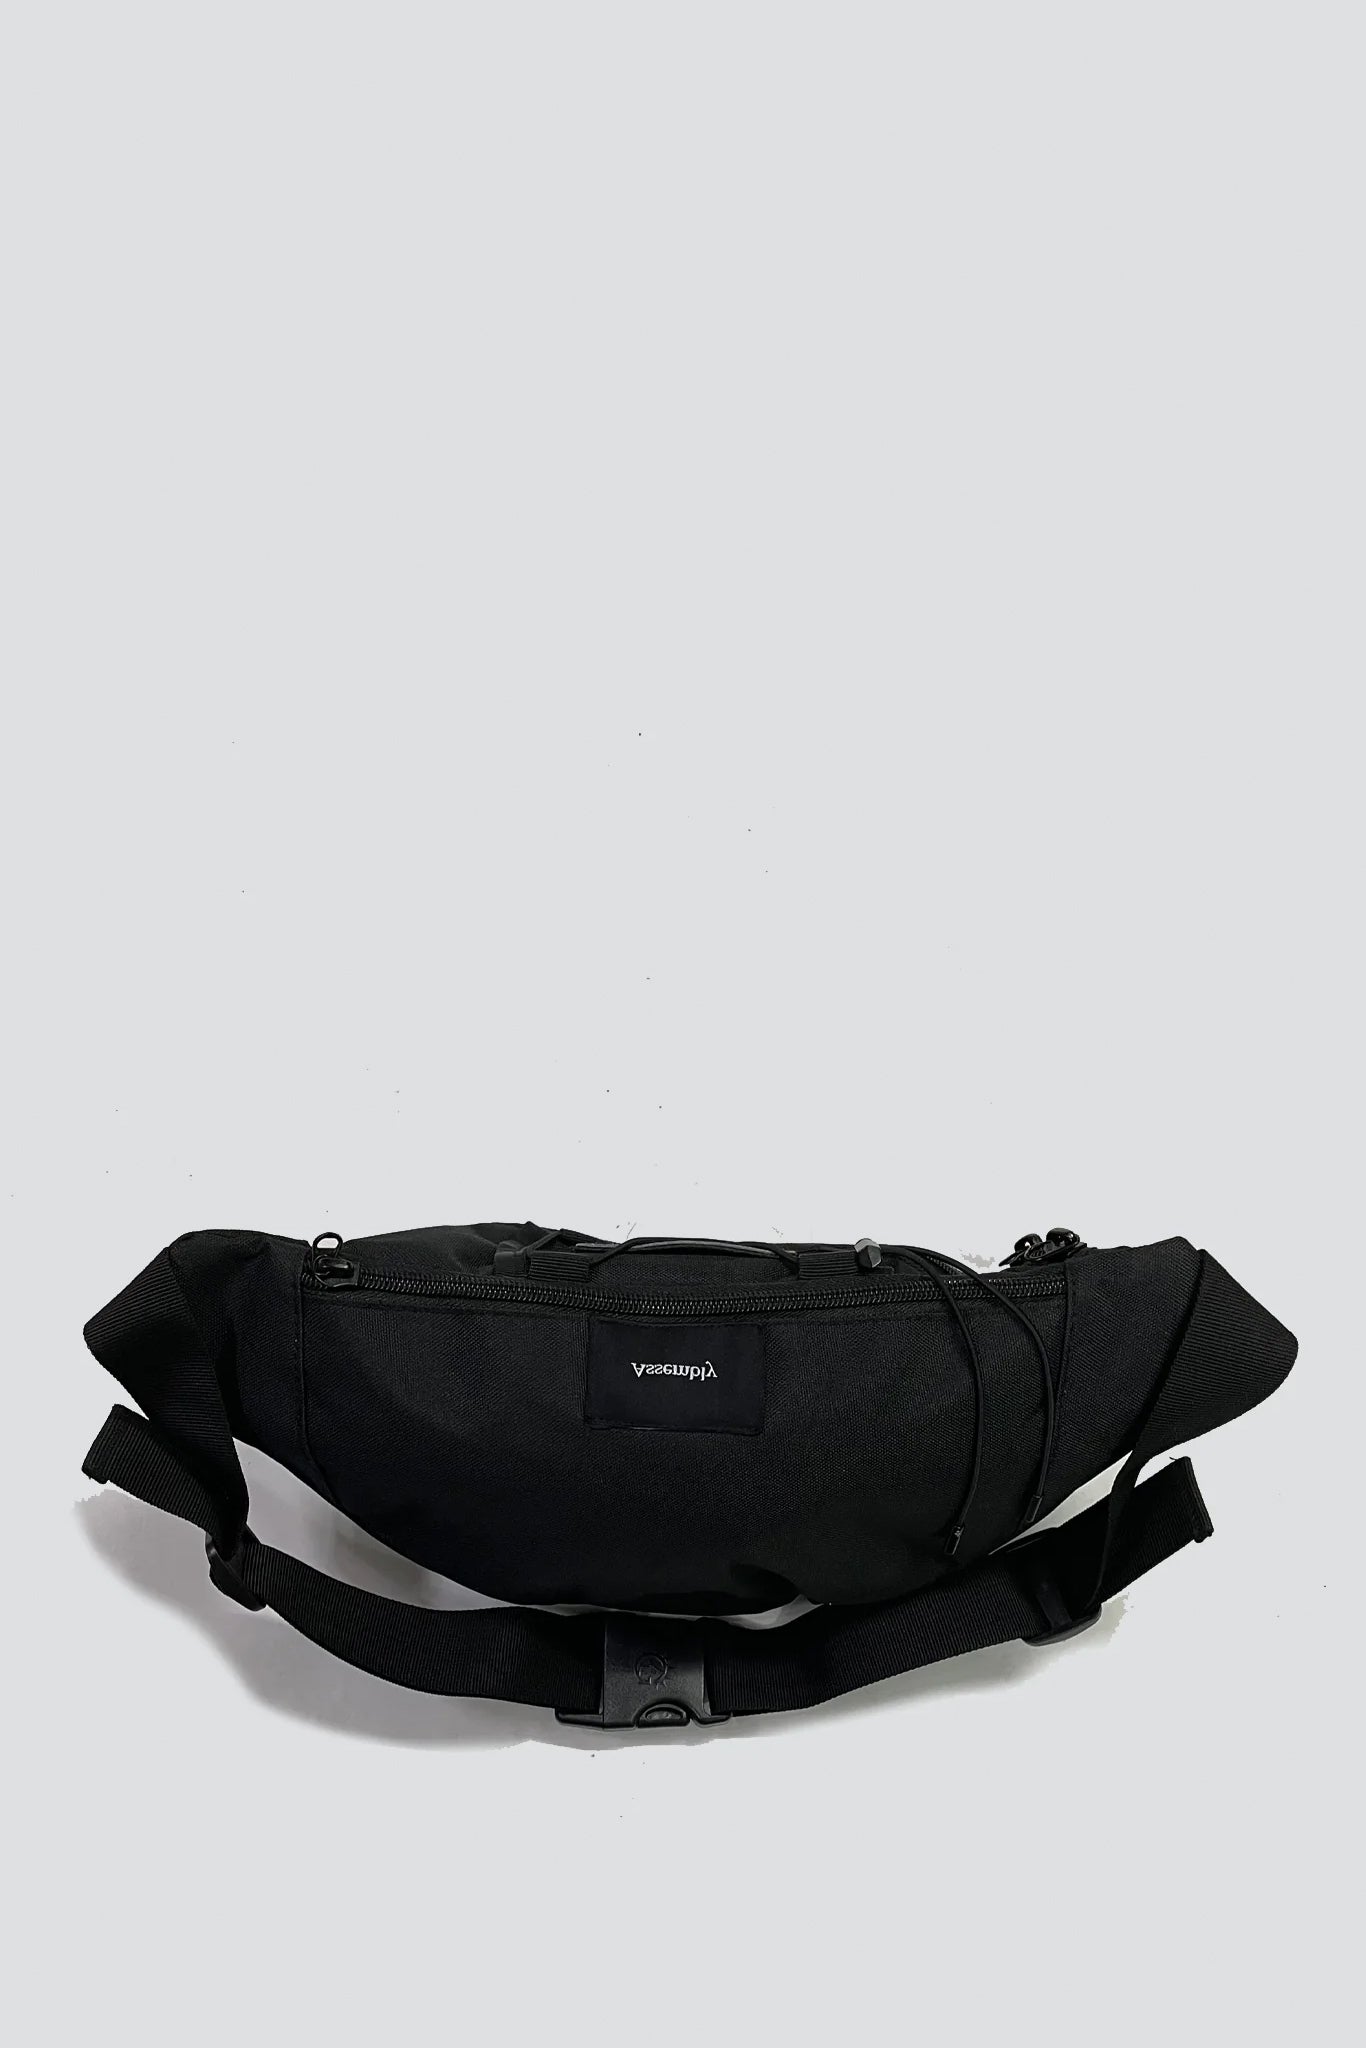 Assembly New York Leather Sac